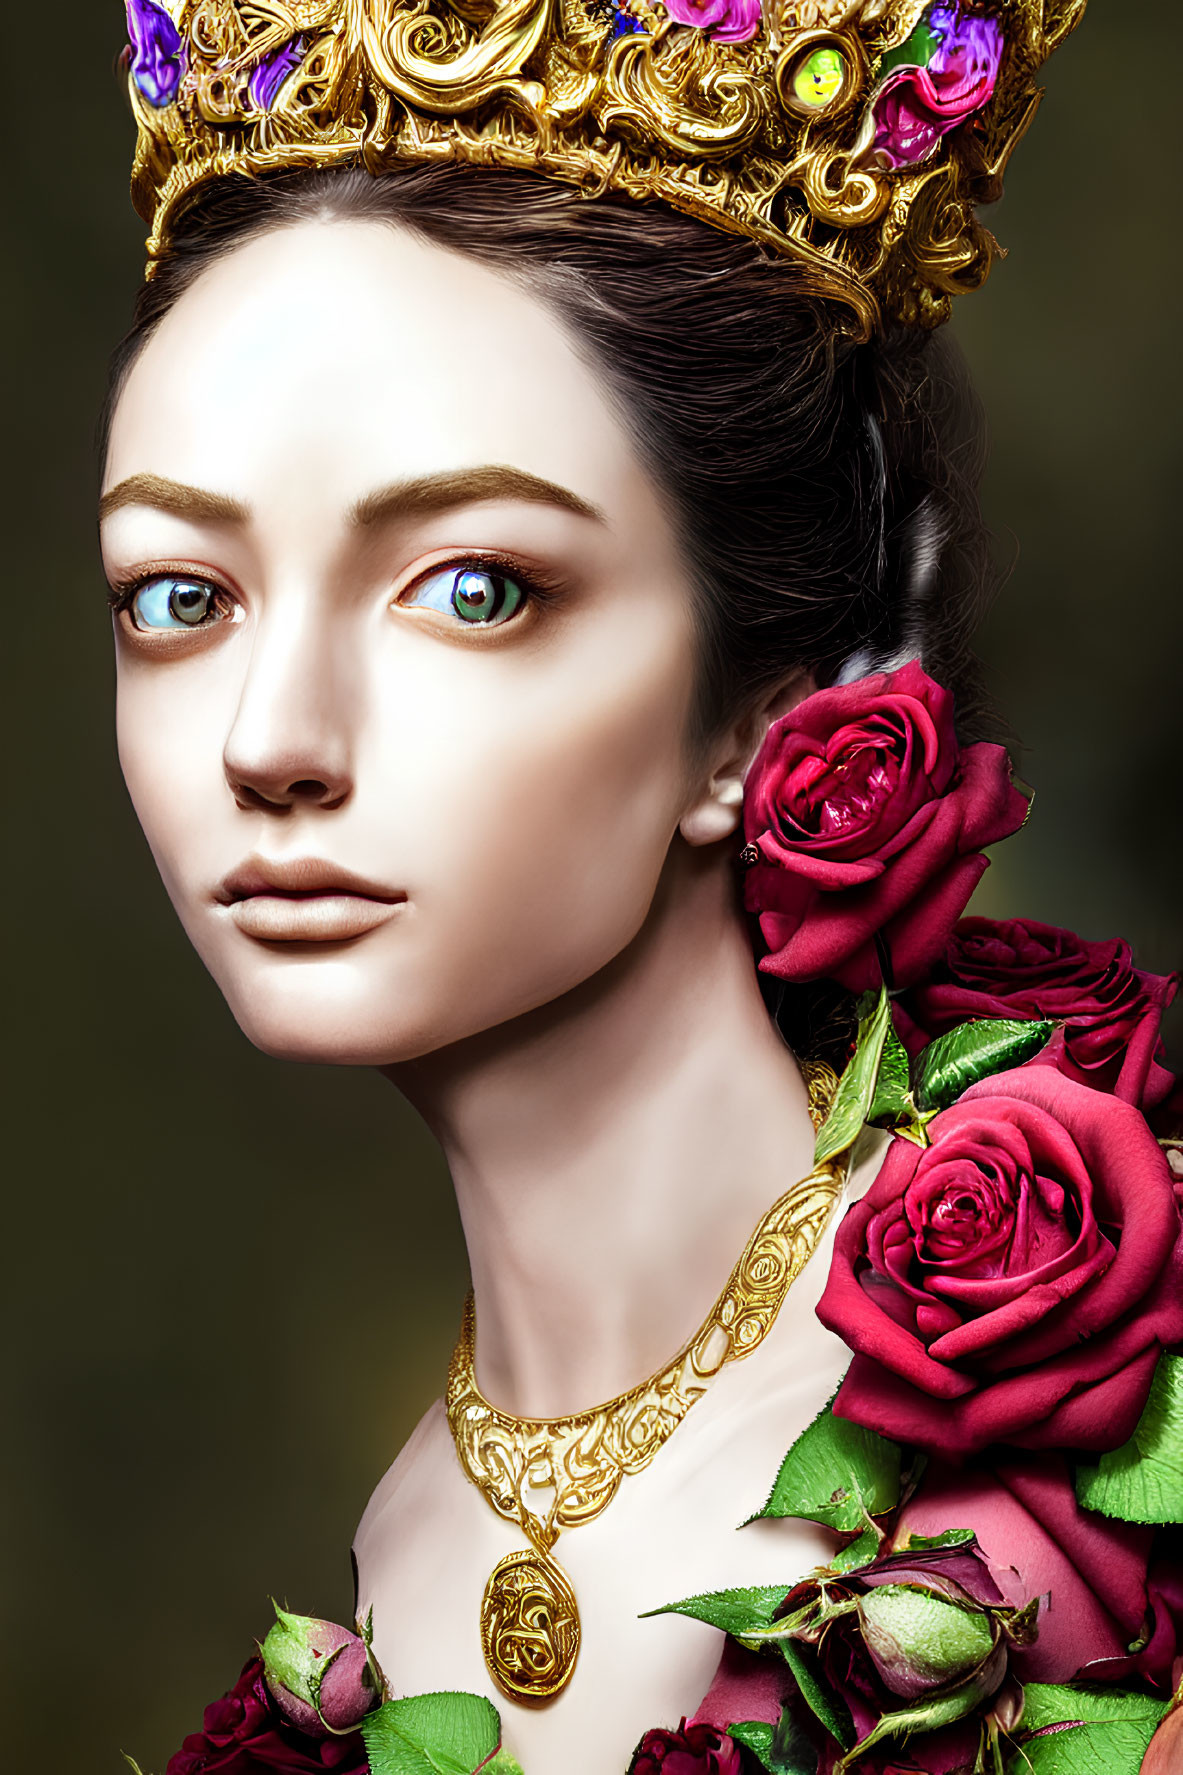 Portrait of woman with golden crown, blue eyes, and red roses.